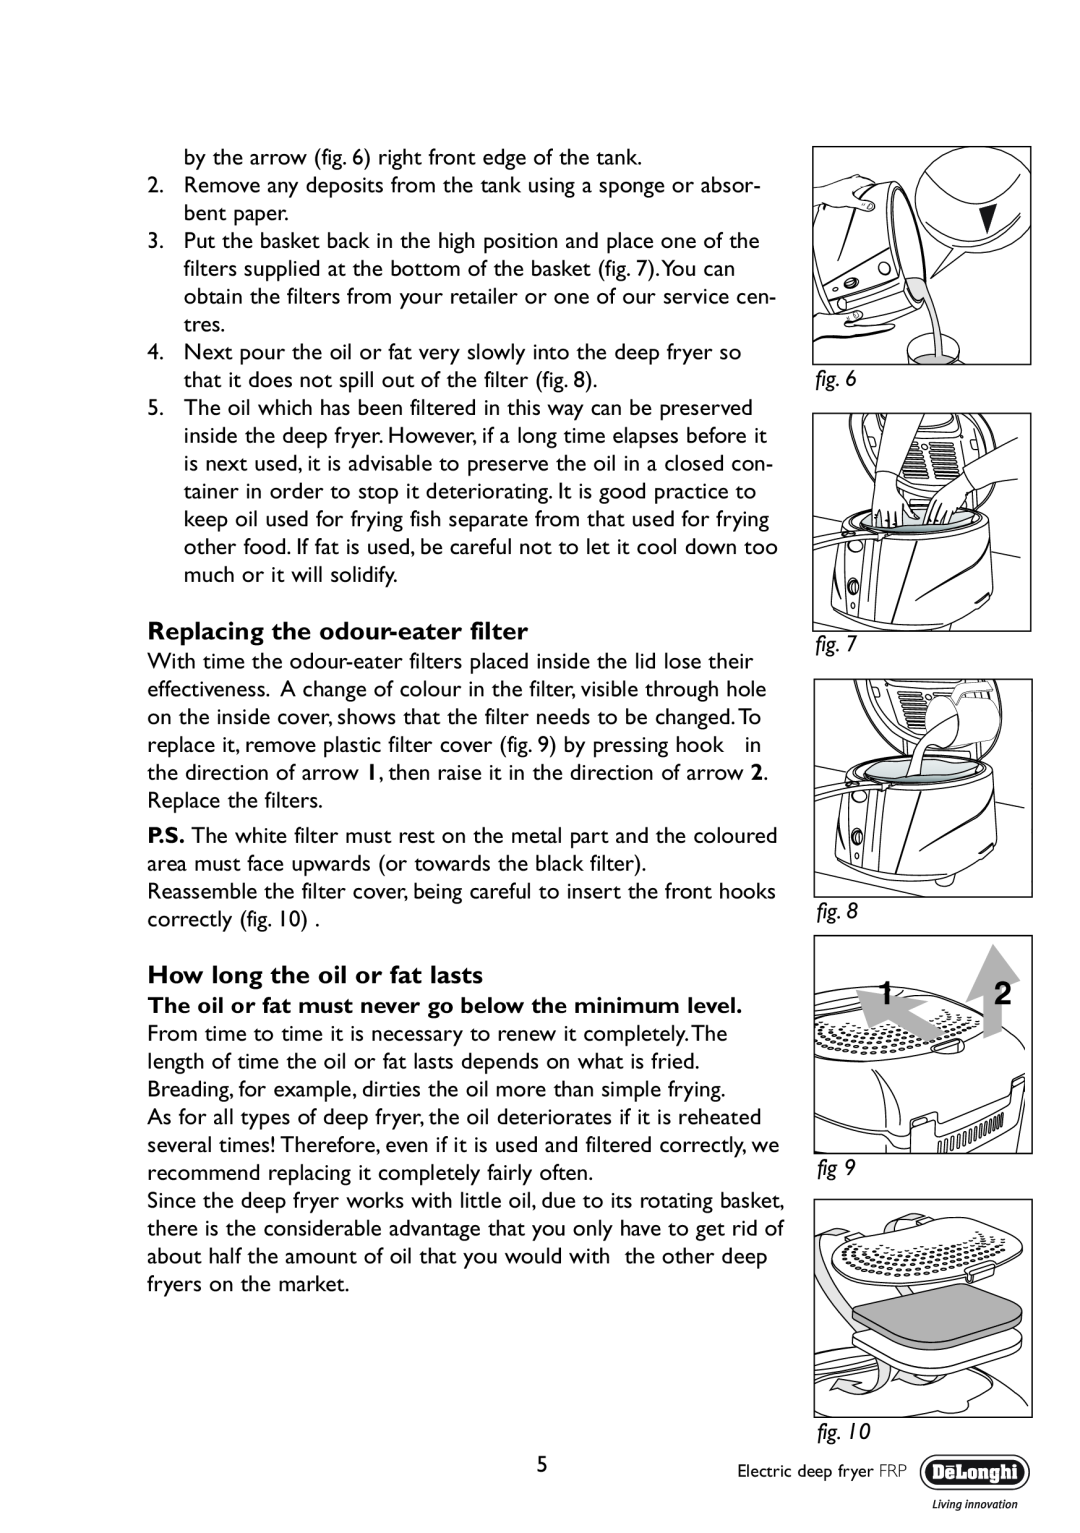 DeLonghi FRP manual Replacing the odour-eaterfilter, How long the oil or fat lasts, fig. fig. fig 